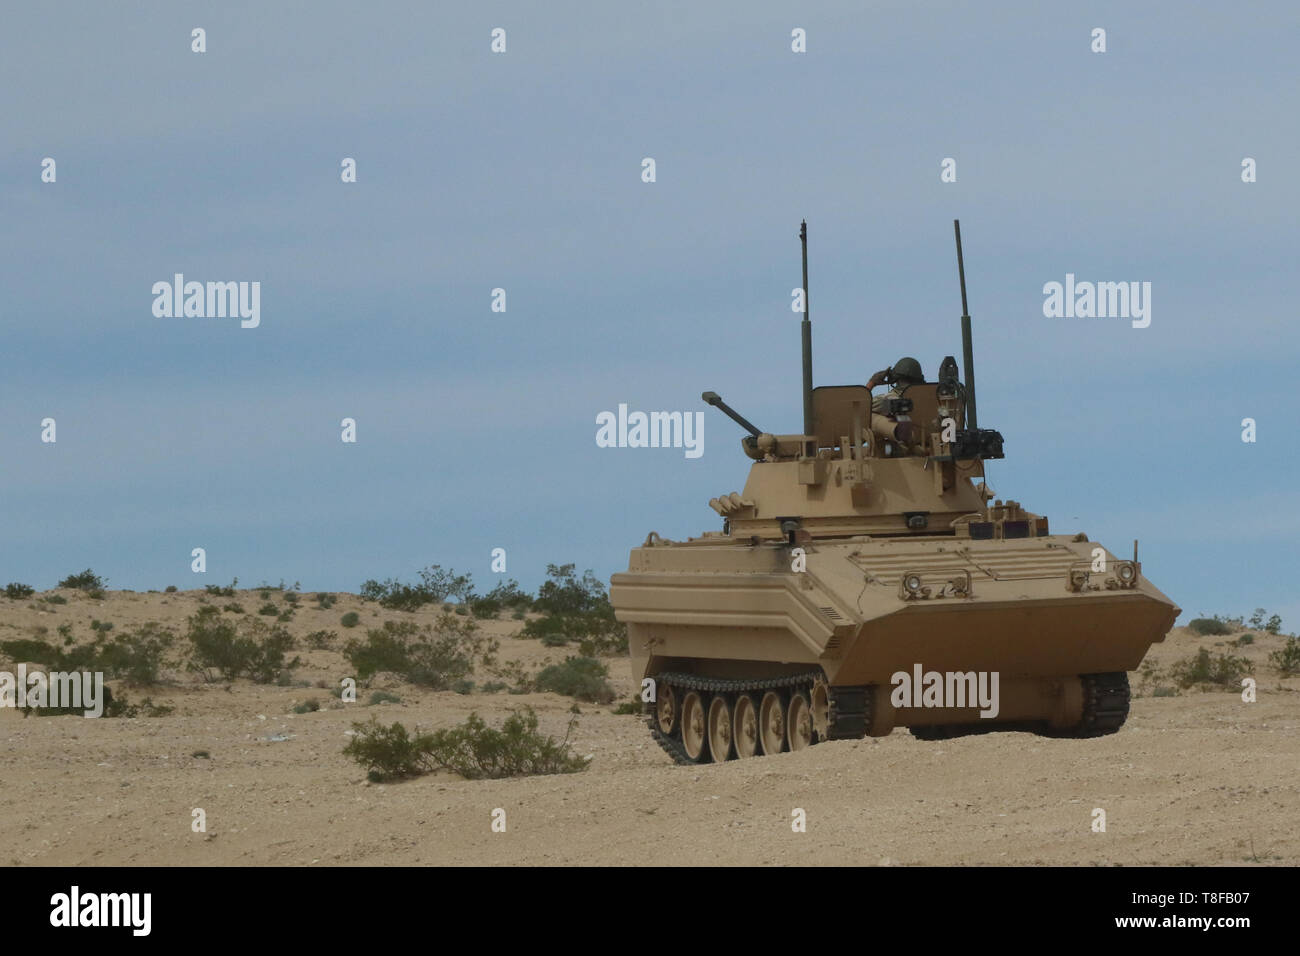 11th Armored Cavalry Trooper stand their ground against the incoming elements of the 2nd Armored Brigade Combat Team, 1st Cavalry Division, National Training Center, Calif., April 11th, 2019. This defense will test the 2/1 ABCT Cav’s ability to attack and hold a foreign city. (U.S. Army Photo By Pv2 James Newsome) Stock Photo